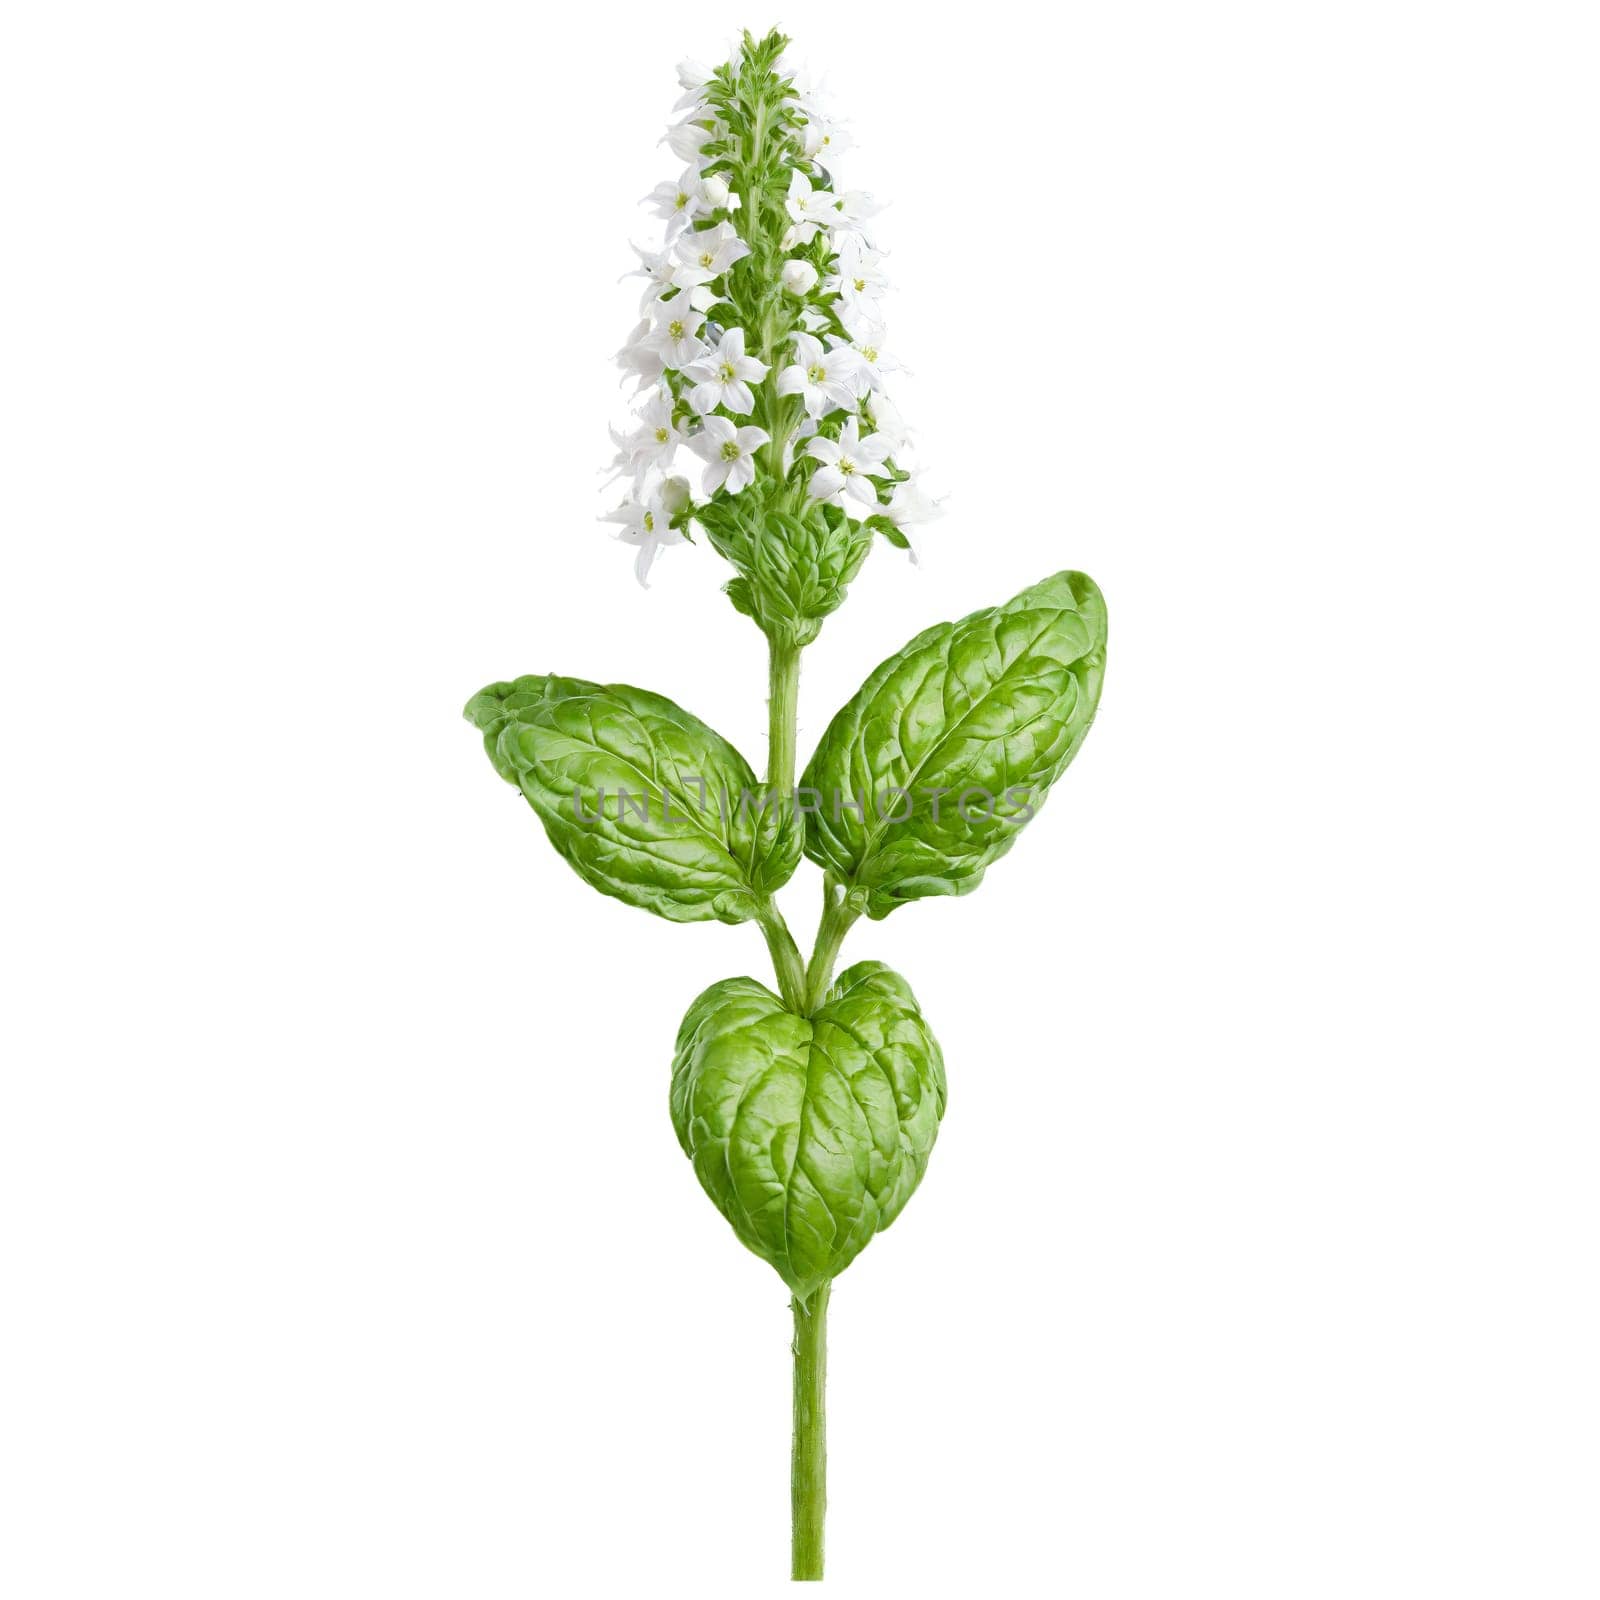 Basil Plant large green leaves and spikes of white flowers Ocimum basilicum Final image should. Plants isolated on transparent background.